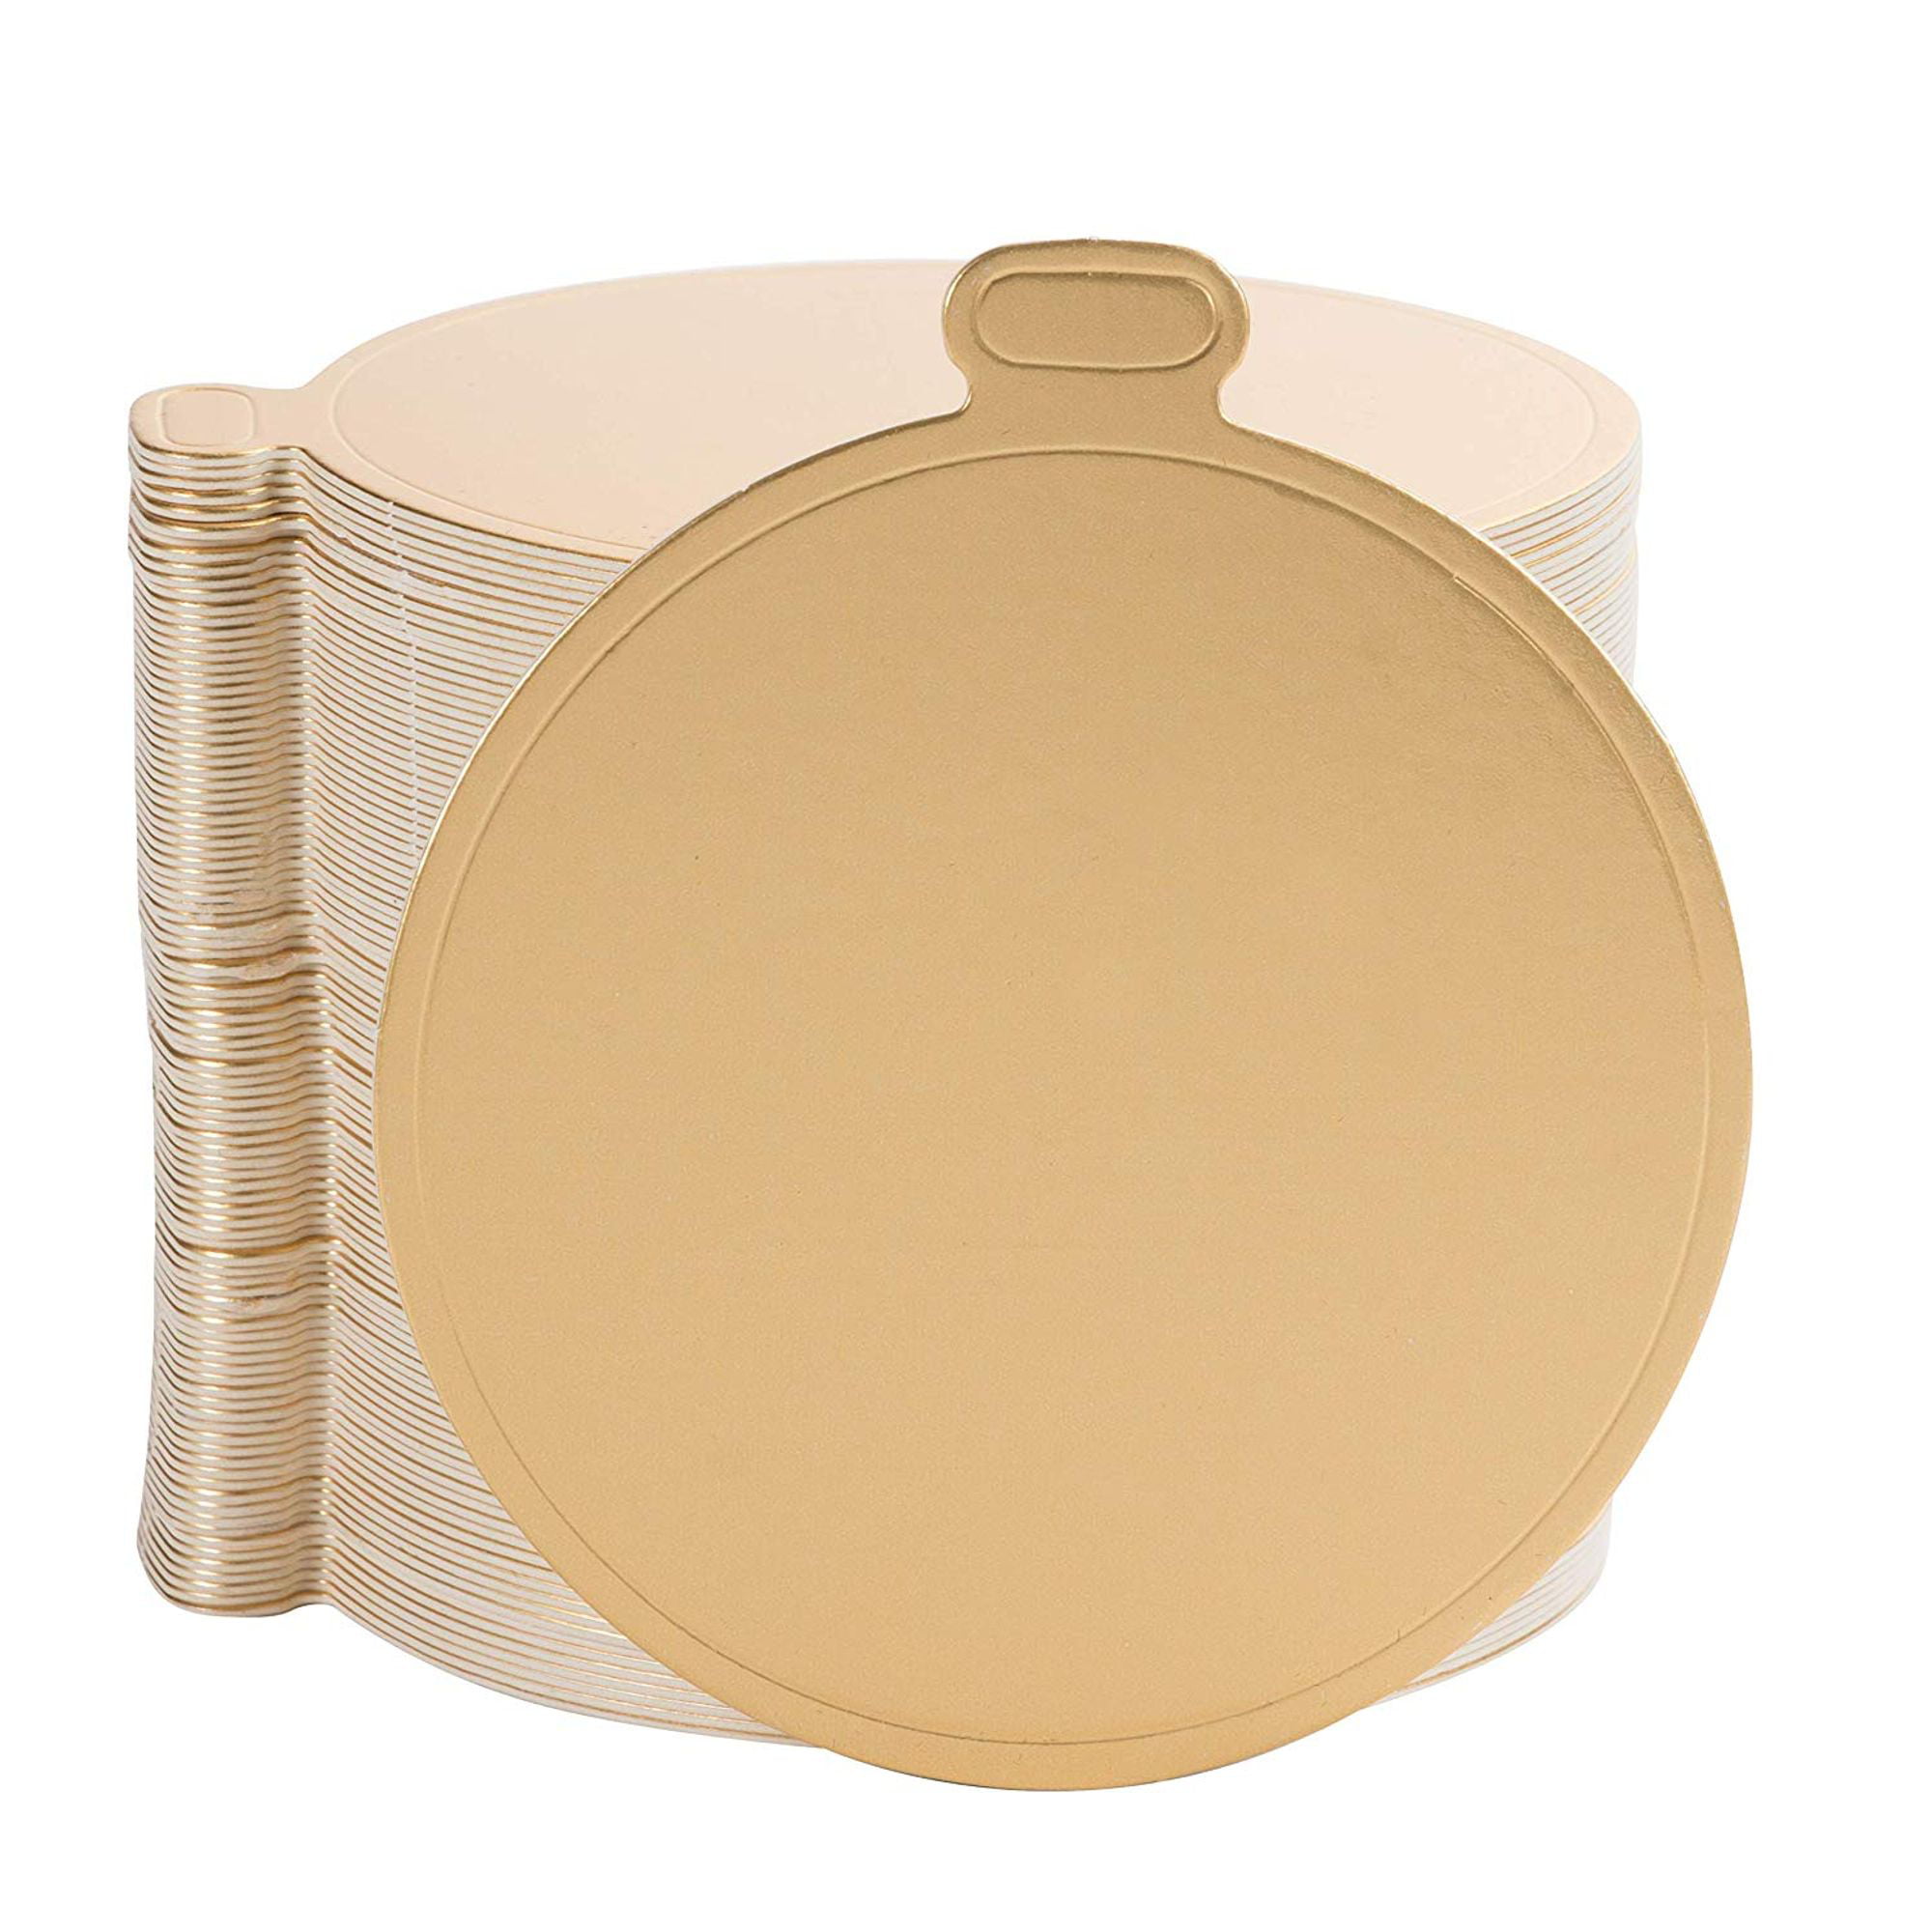 Mini Cake Boards 100Pack Metallic Gold 3.5Inch Round Base for Single Serve Sweets, Plain